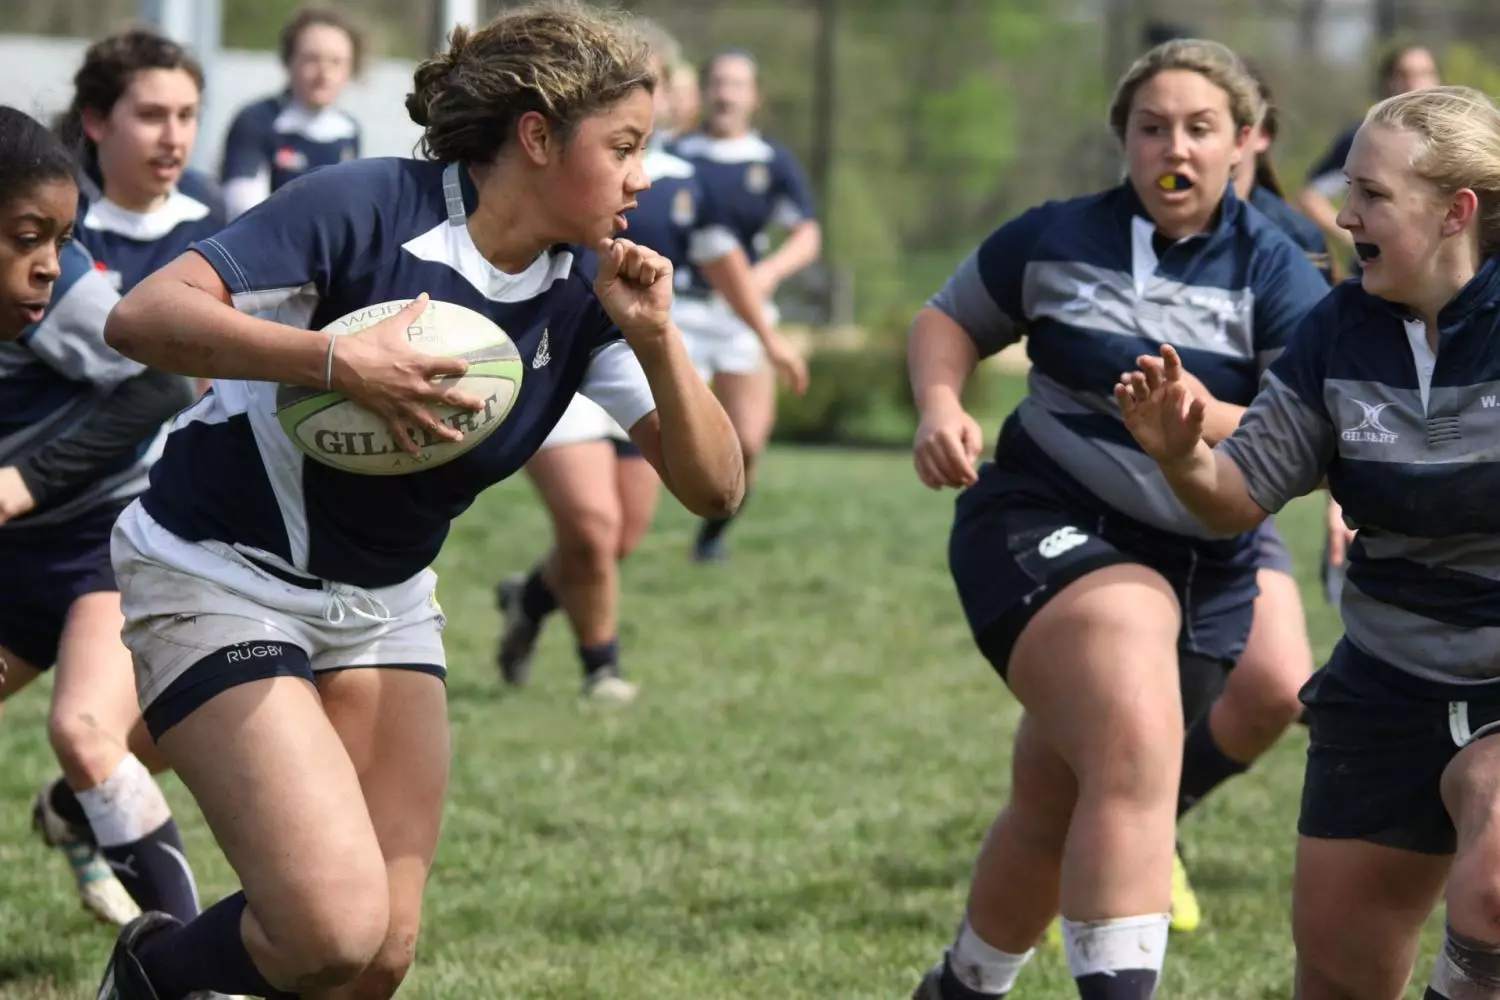 The Unique Challenges of Injury Prevention in Women’s Rugby